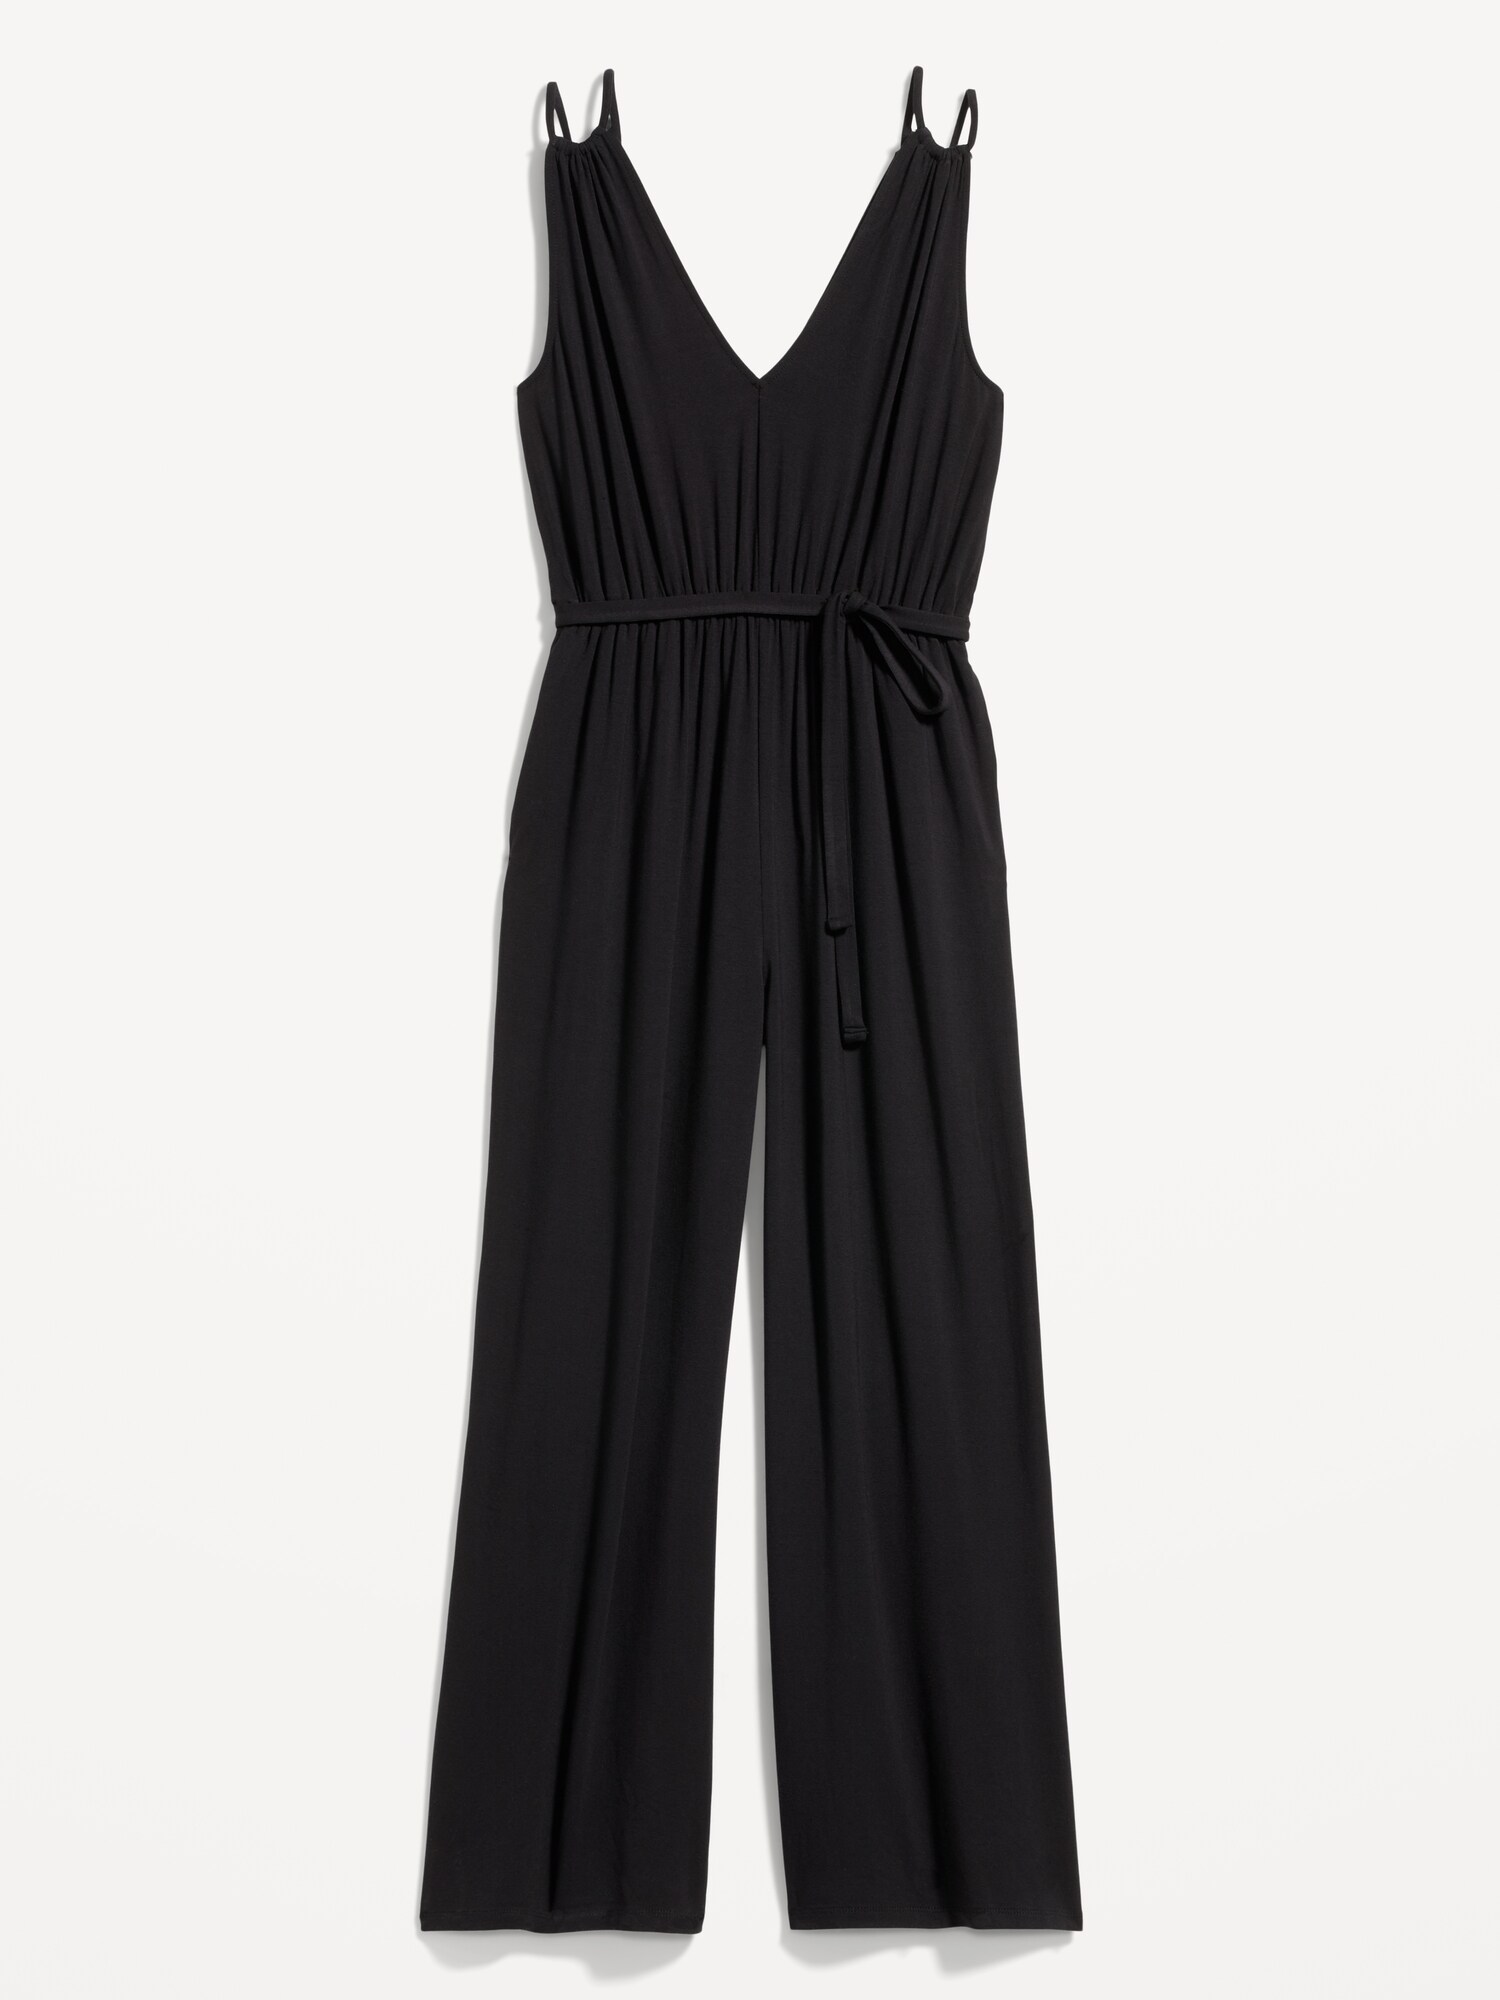 Sleeveless Double-Strap Ankle-Length Jumpsuit